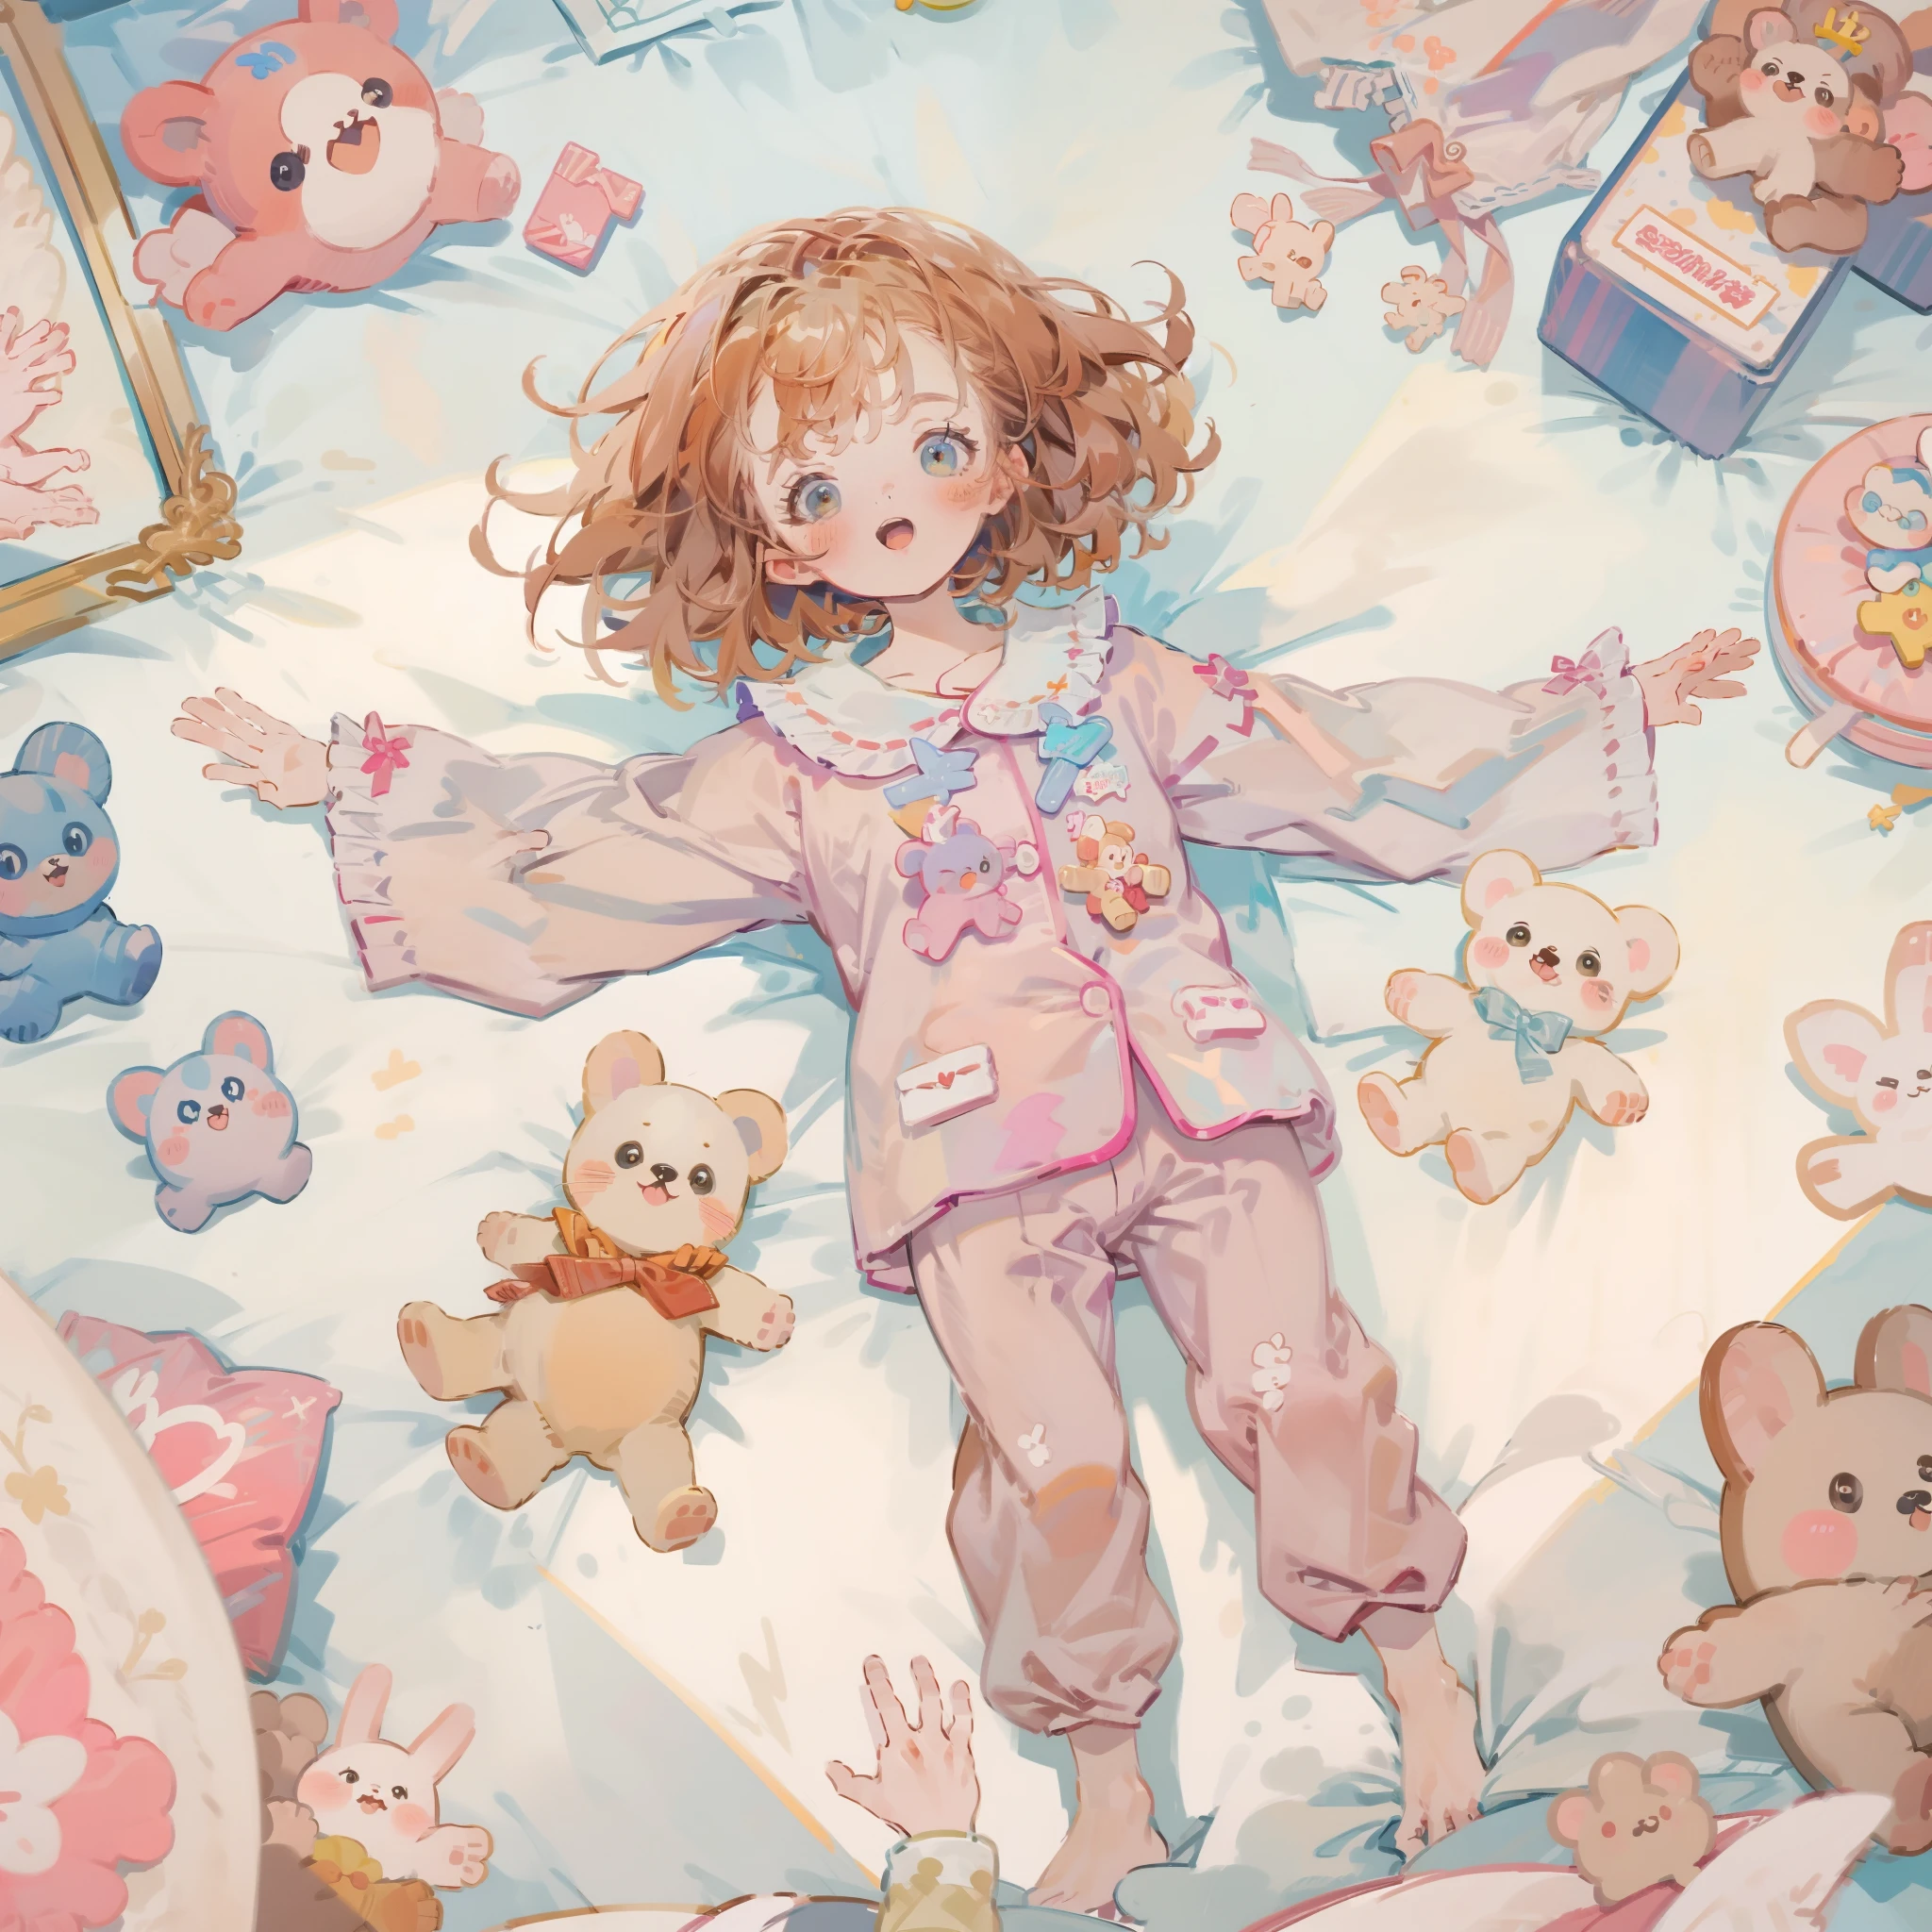 softlighting，softfocus，blurry image，high lighting，Low contrast，The overall feel is like an oil painting,Raise both hands,spreading arms widely,Pink pajamas,brown haired,Medium Hair,Puni Puni cheeks,Mouth open,Bedroom,Warm light,I'm excited,Warm illustrations,From  above,close-up,a closeup,teddy bears,is standing,